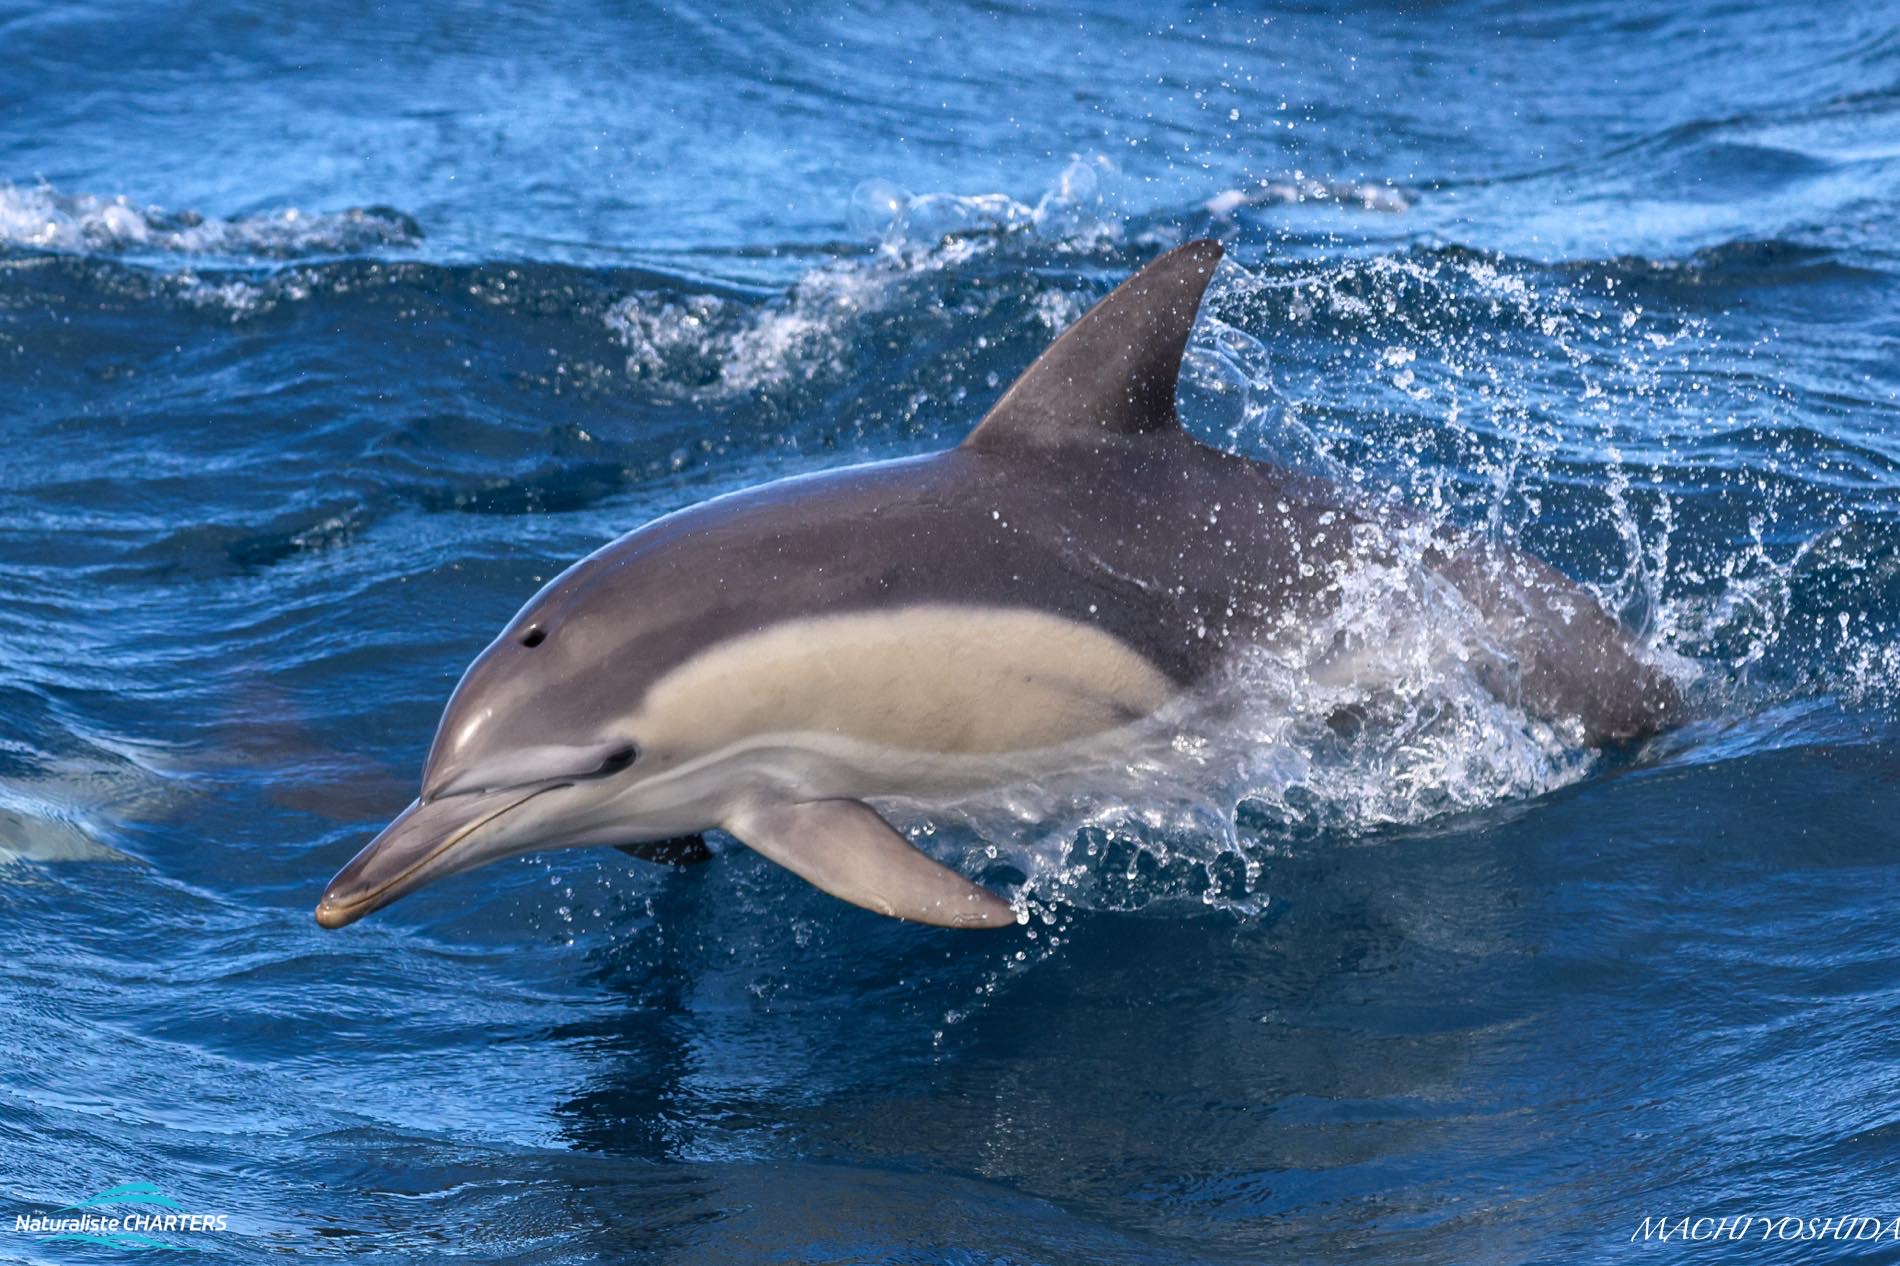 A common dolphin at Bremer Canyon. One of many that shadow our boat this trip